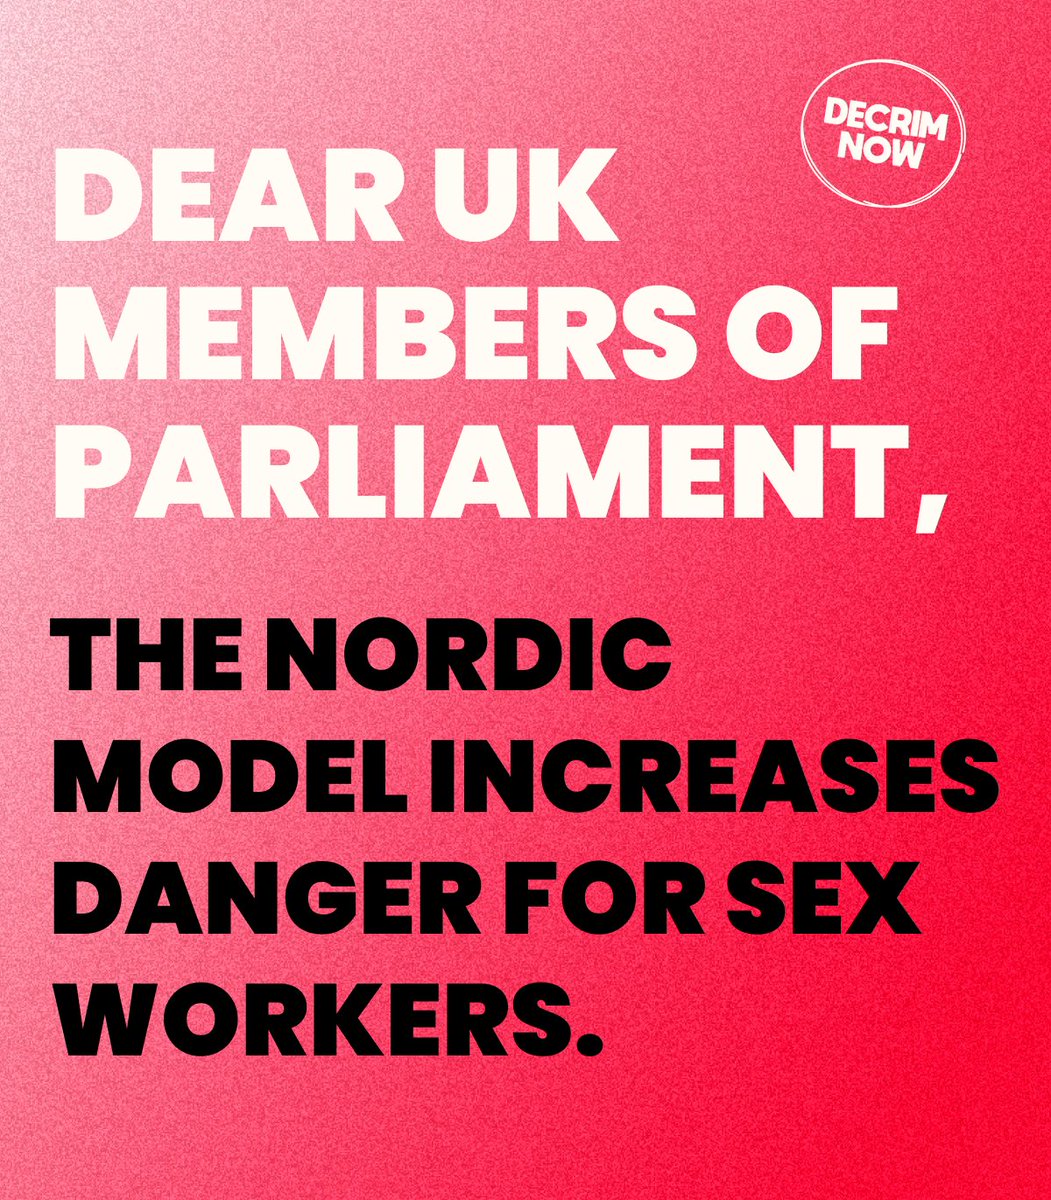  @nusuk signed our open letter against the Nordic Model The National Union of Students of the United Kingdom is a confederation of students' unions in the United Kingdom. Read the letter here  https://decrimnow.org.uk/open-letter-on-the-nordic-model/  #notonordicmodel